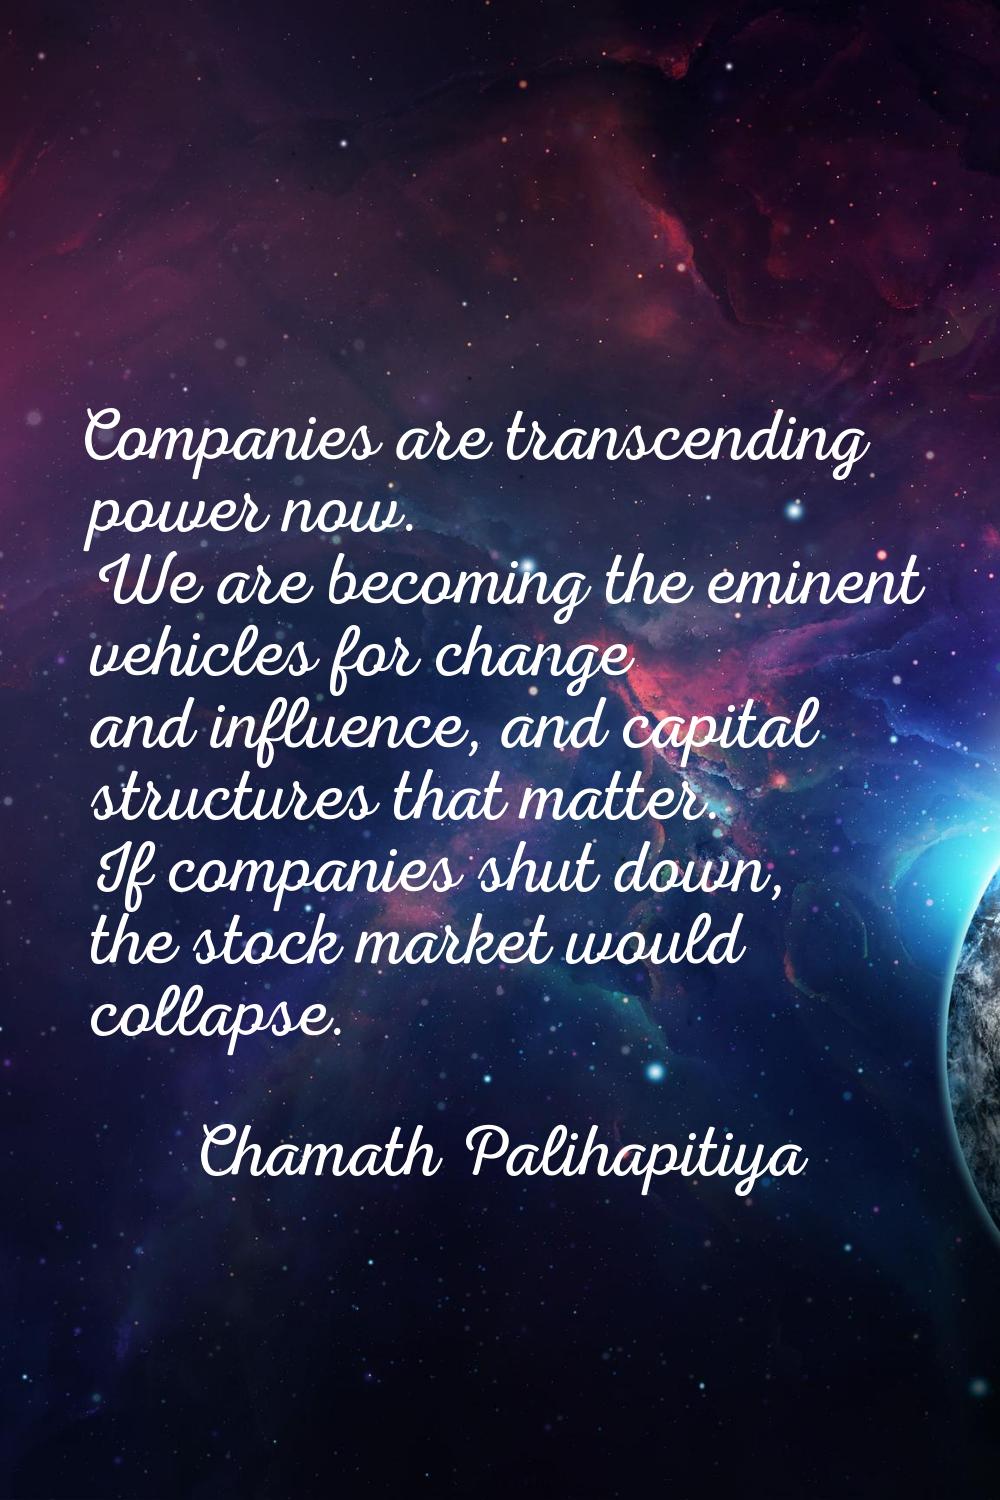 Companies are transcending power now. We are becoming the eminent vehicles for change and influence